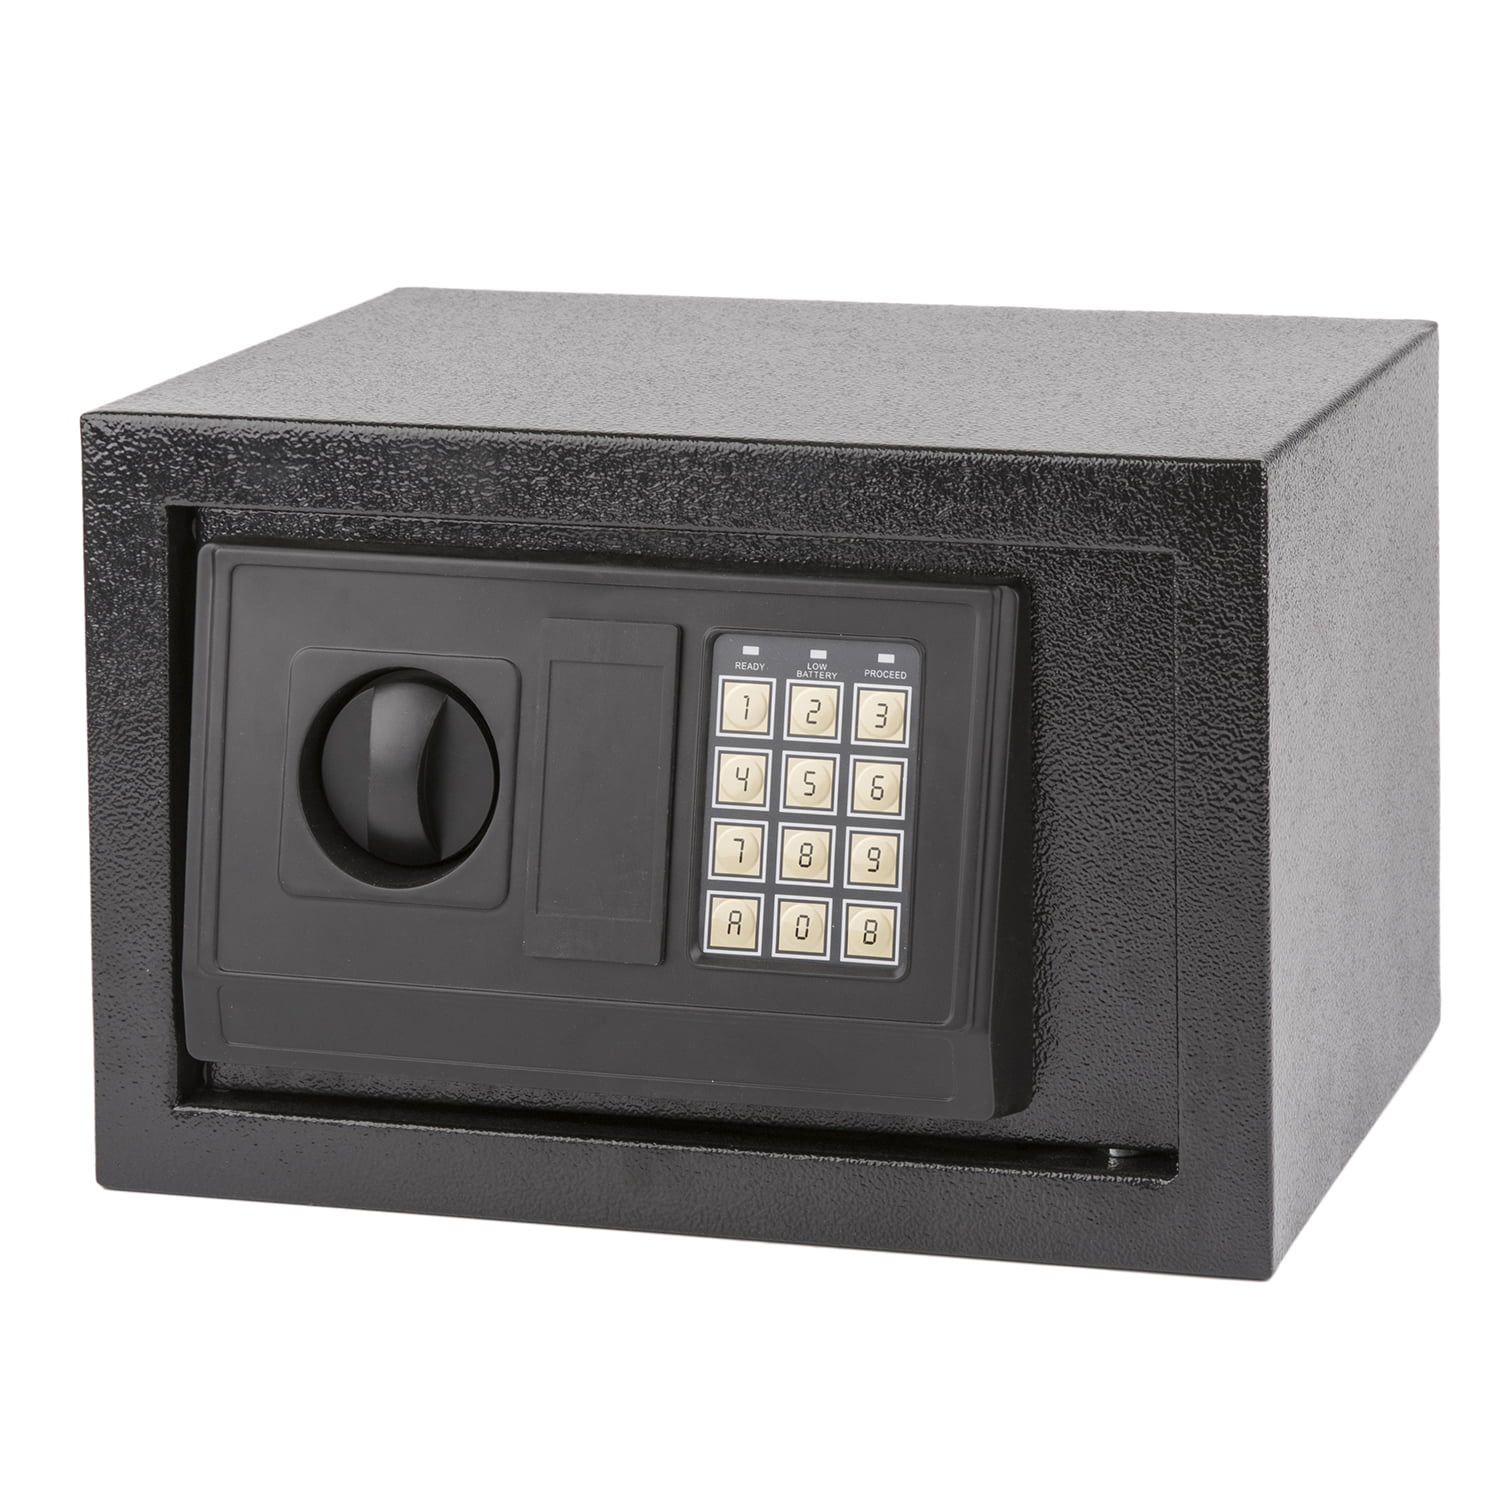 Safety Box Security Steel Safe with Keys Money Cash Safety Box Black Strong Box 